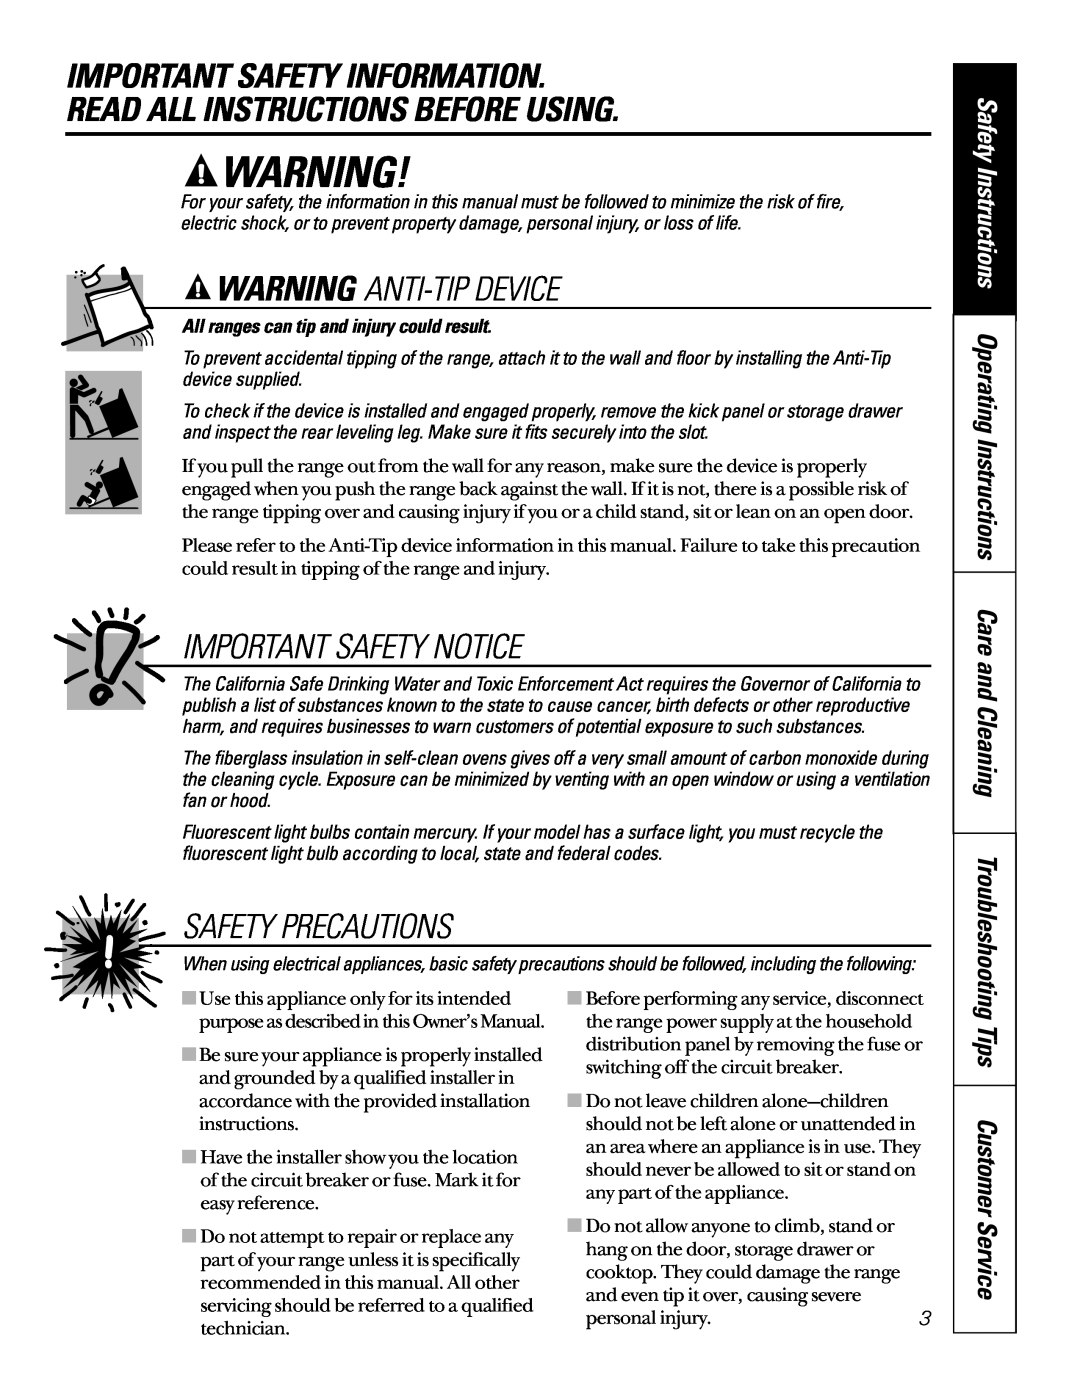 GE JBP79 Important Safety Information Read All Instructions Before Using, Warning Anti-Tip Device, Important Safety Notice 